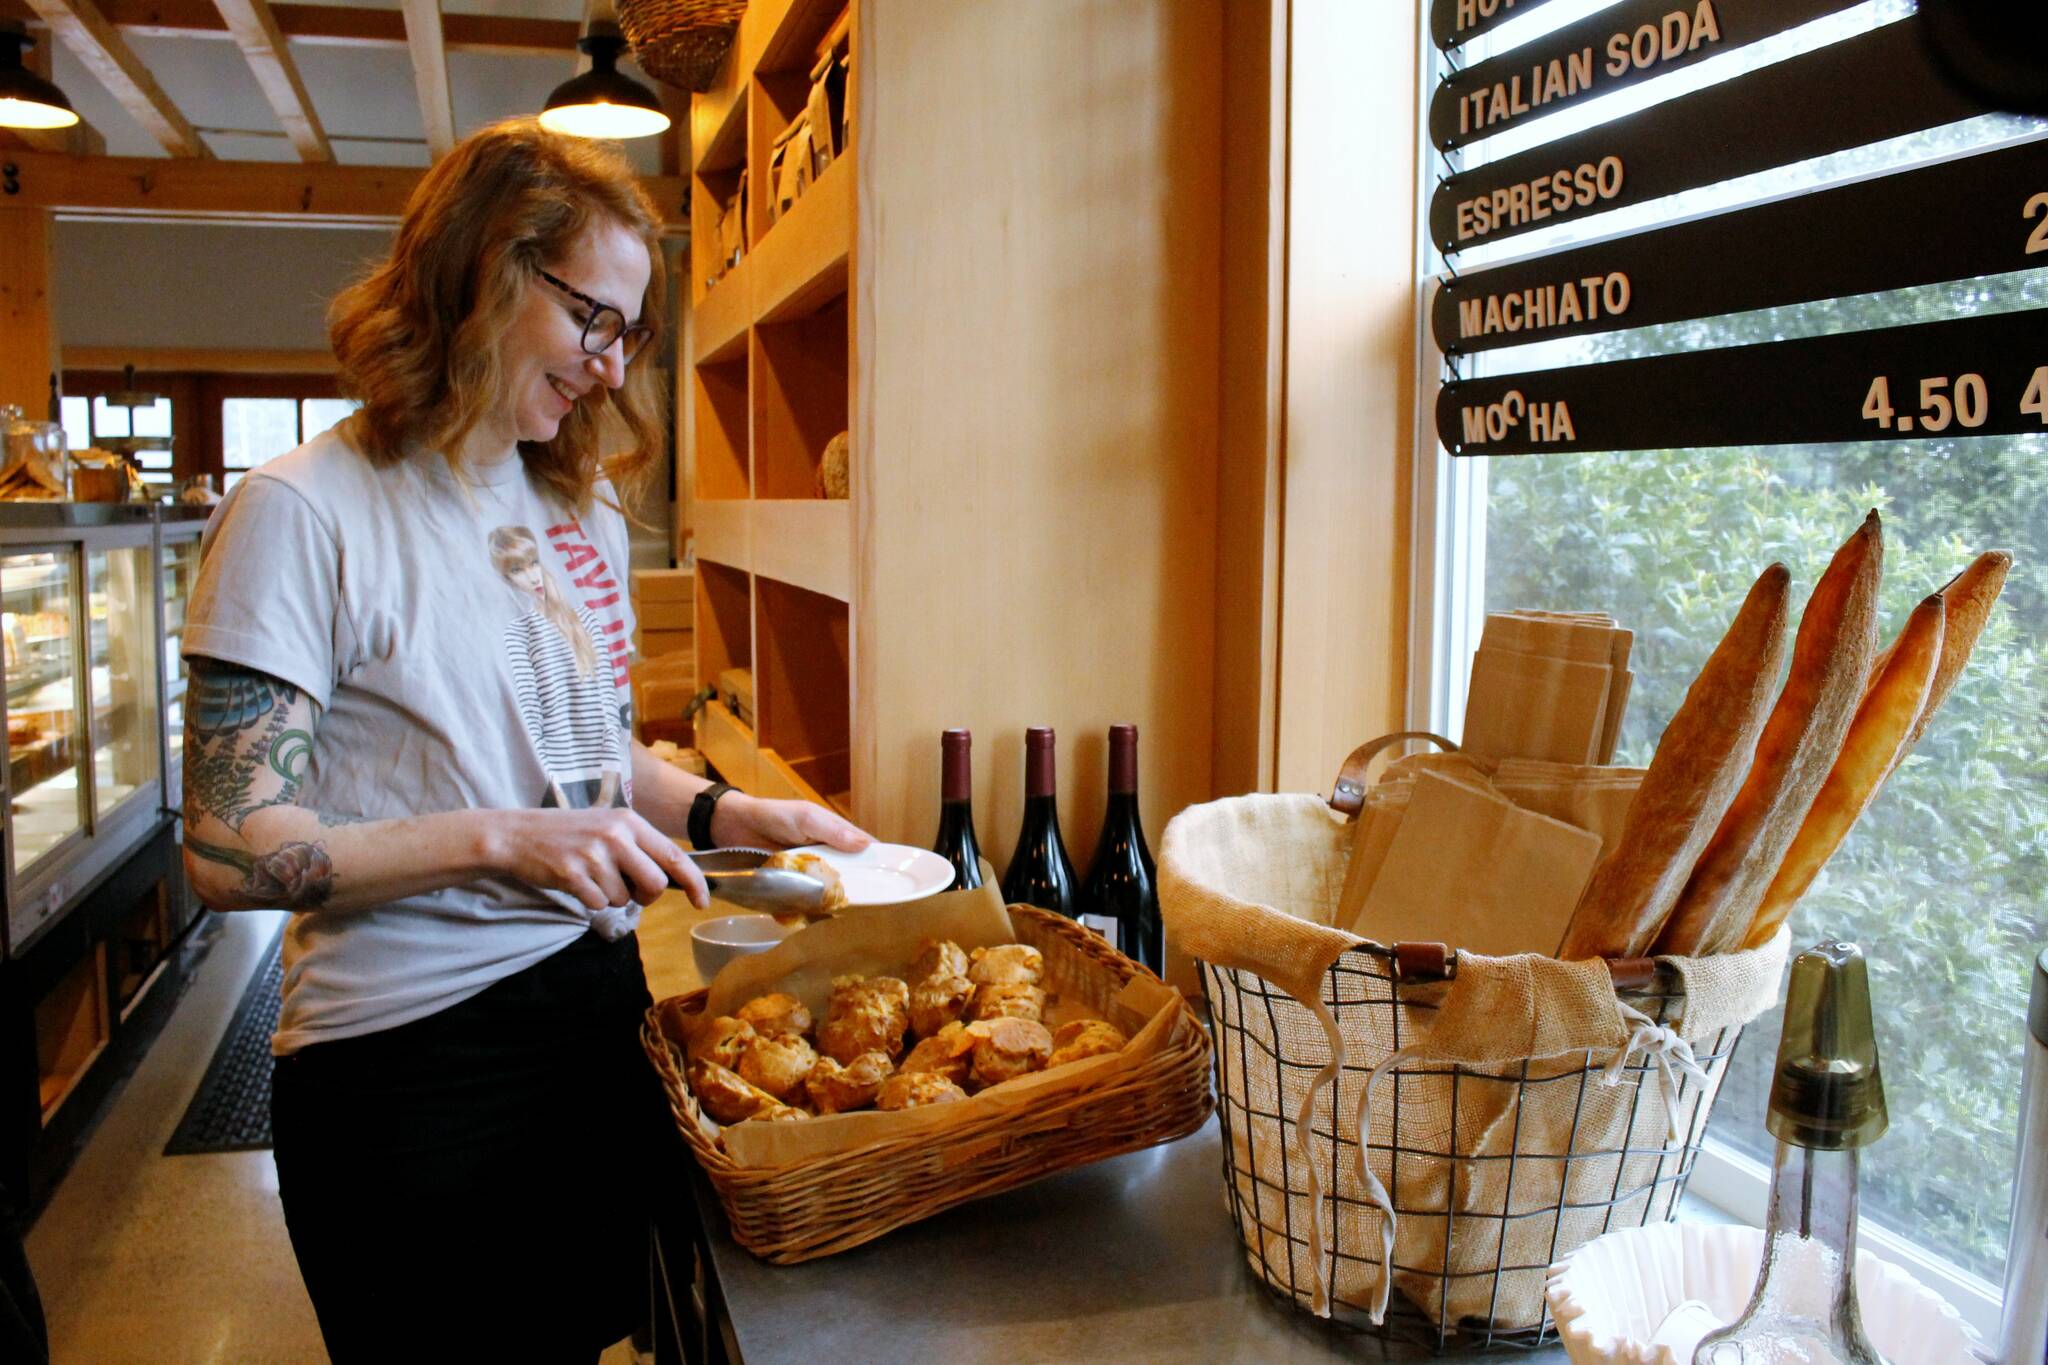 Photo by Kira Erickson/South Whidbey Record
Hannah McCabe, the manager of Seabiscuit Bakery, grabs a gougère to serve.